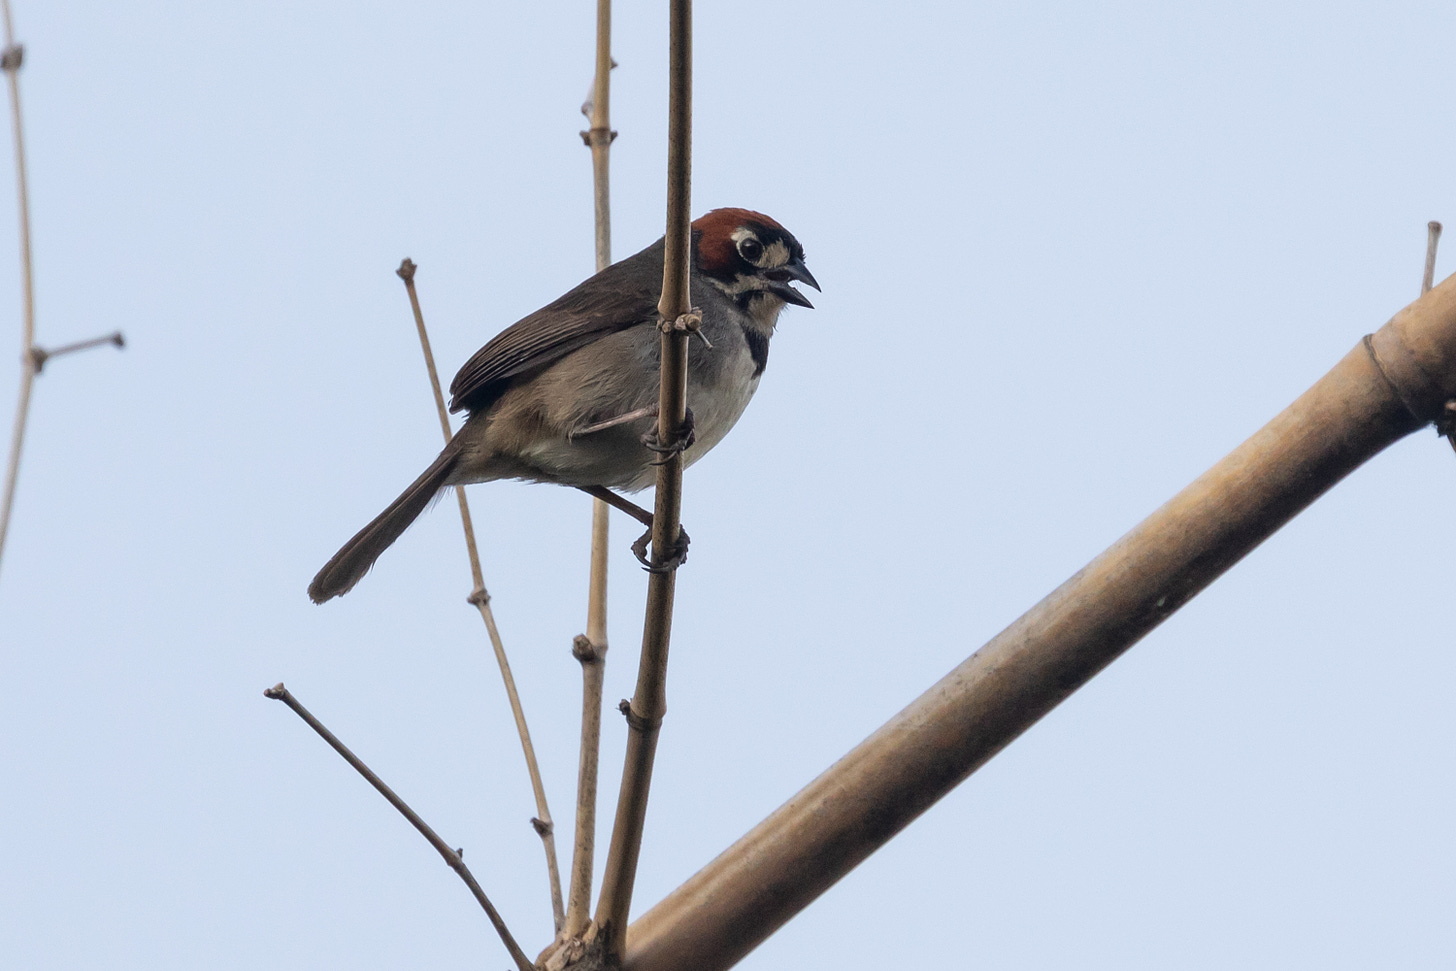 a gray-brown songbird perched on a bare snag. it has a russet head with white around and in front of the eyes and a black beak. it also has a black spot on its chest. it is perched above the viewer, looking down with its mouth open, body facing right